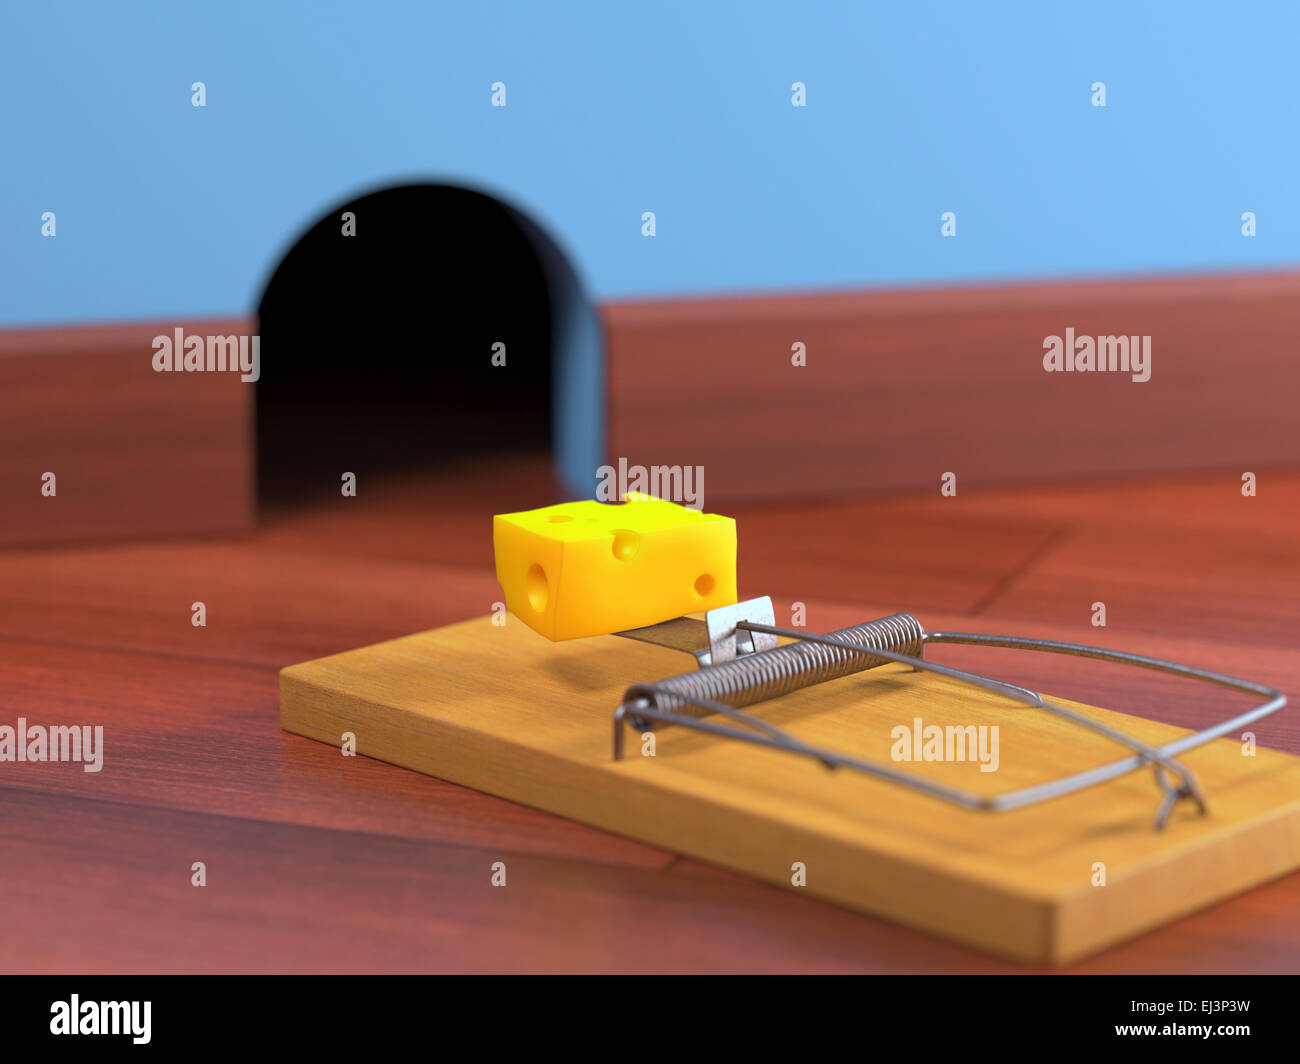 Mouse trap on the floor, illustration Stock Photo